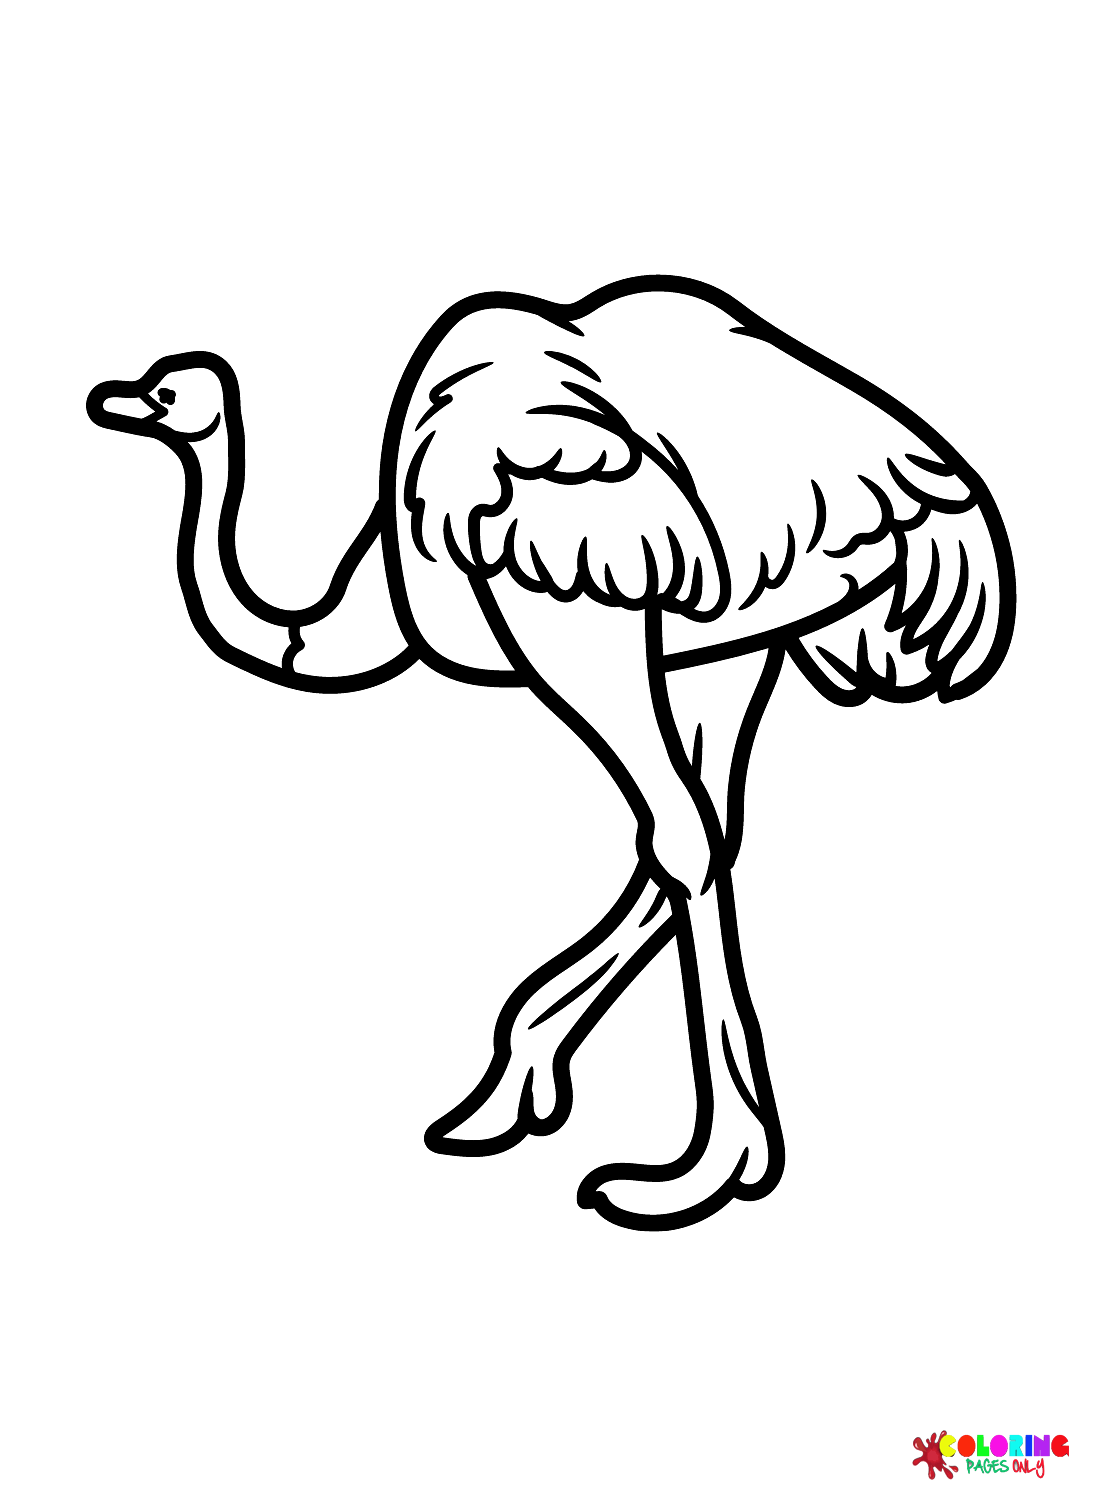 Ostrich Coloring Pages Printable for Free Download